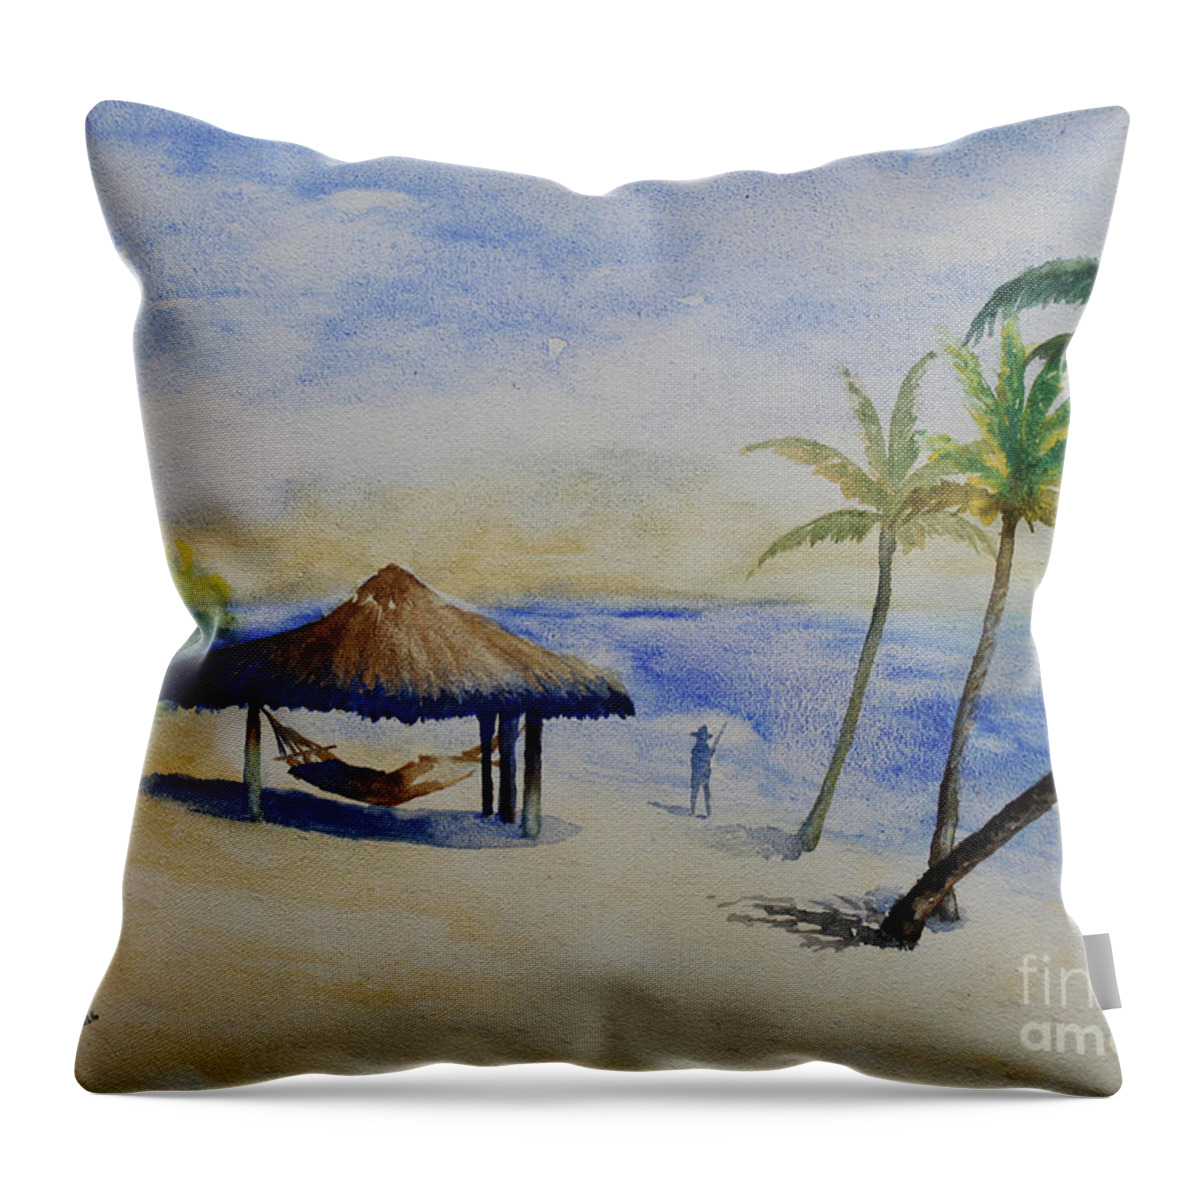 Sky Throw Pillow featuring the painting Cozy Spot by Jerome Wilson